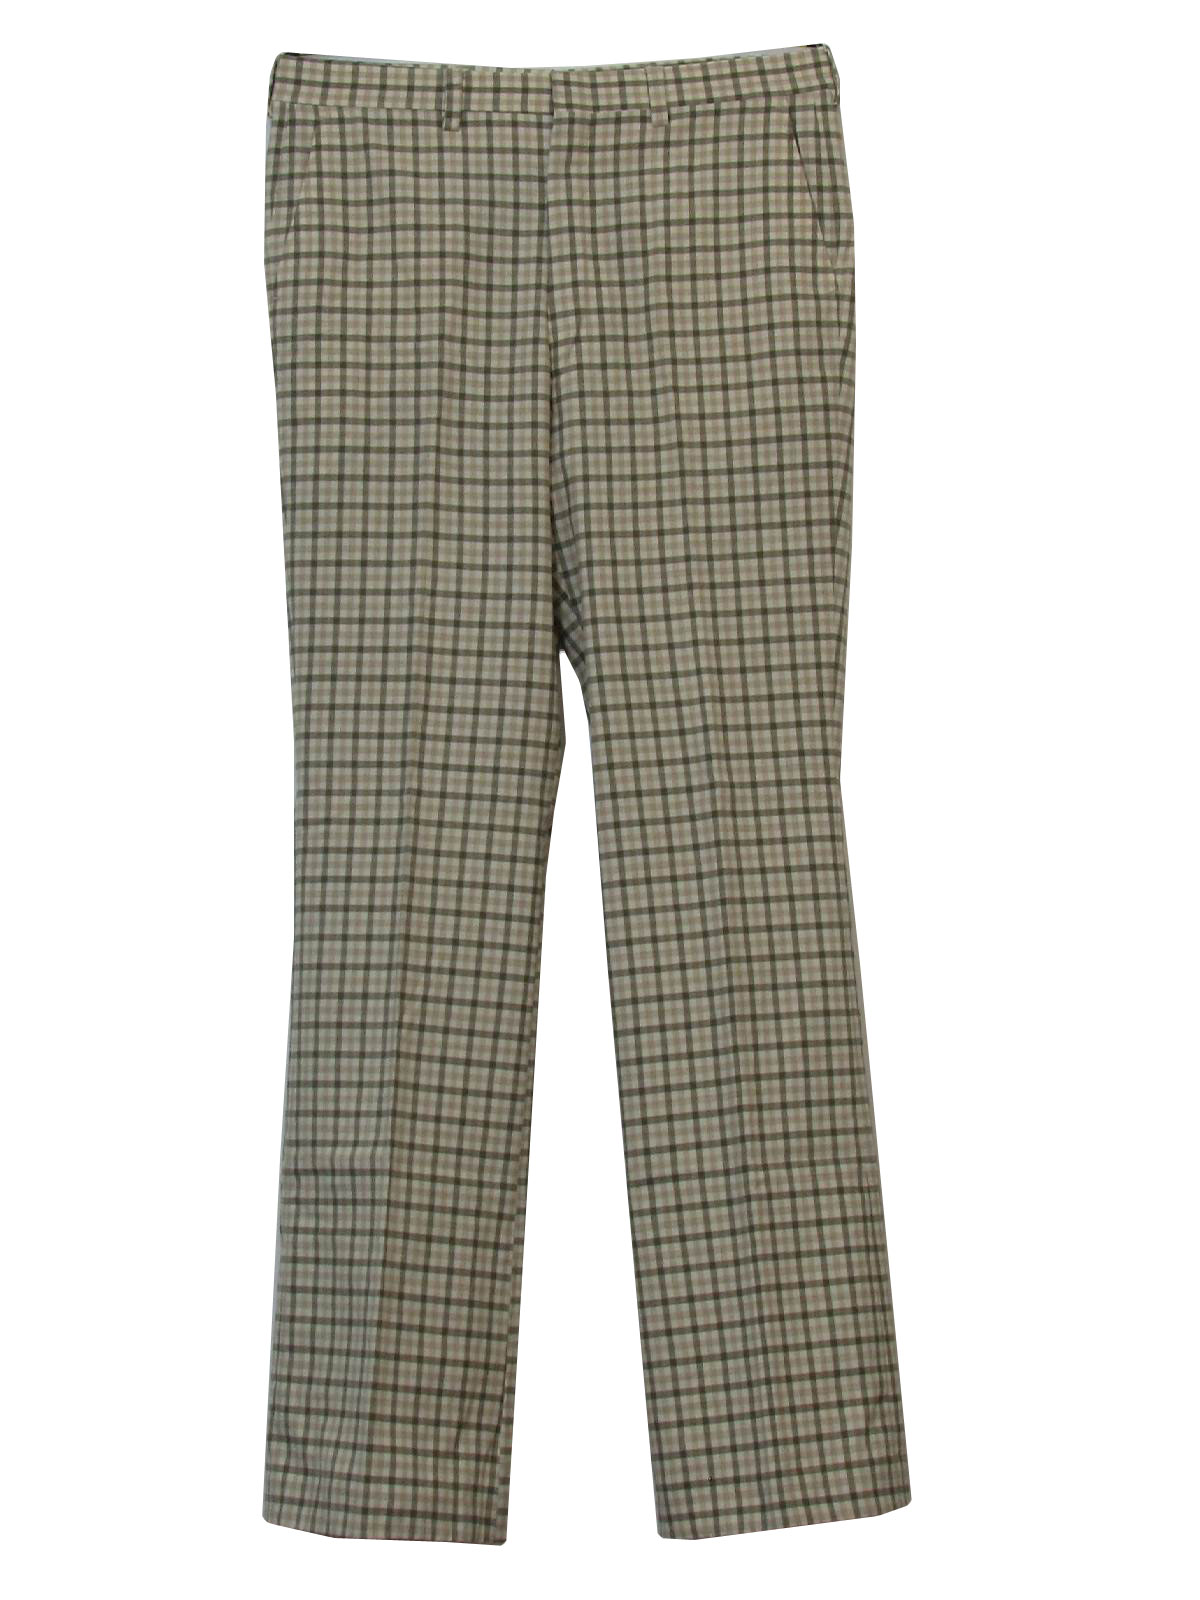 1970's Pants (Johnny Miller): 70s -Johnny Miller- Mens cream, tan and ...